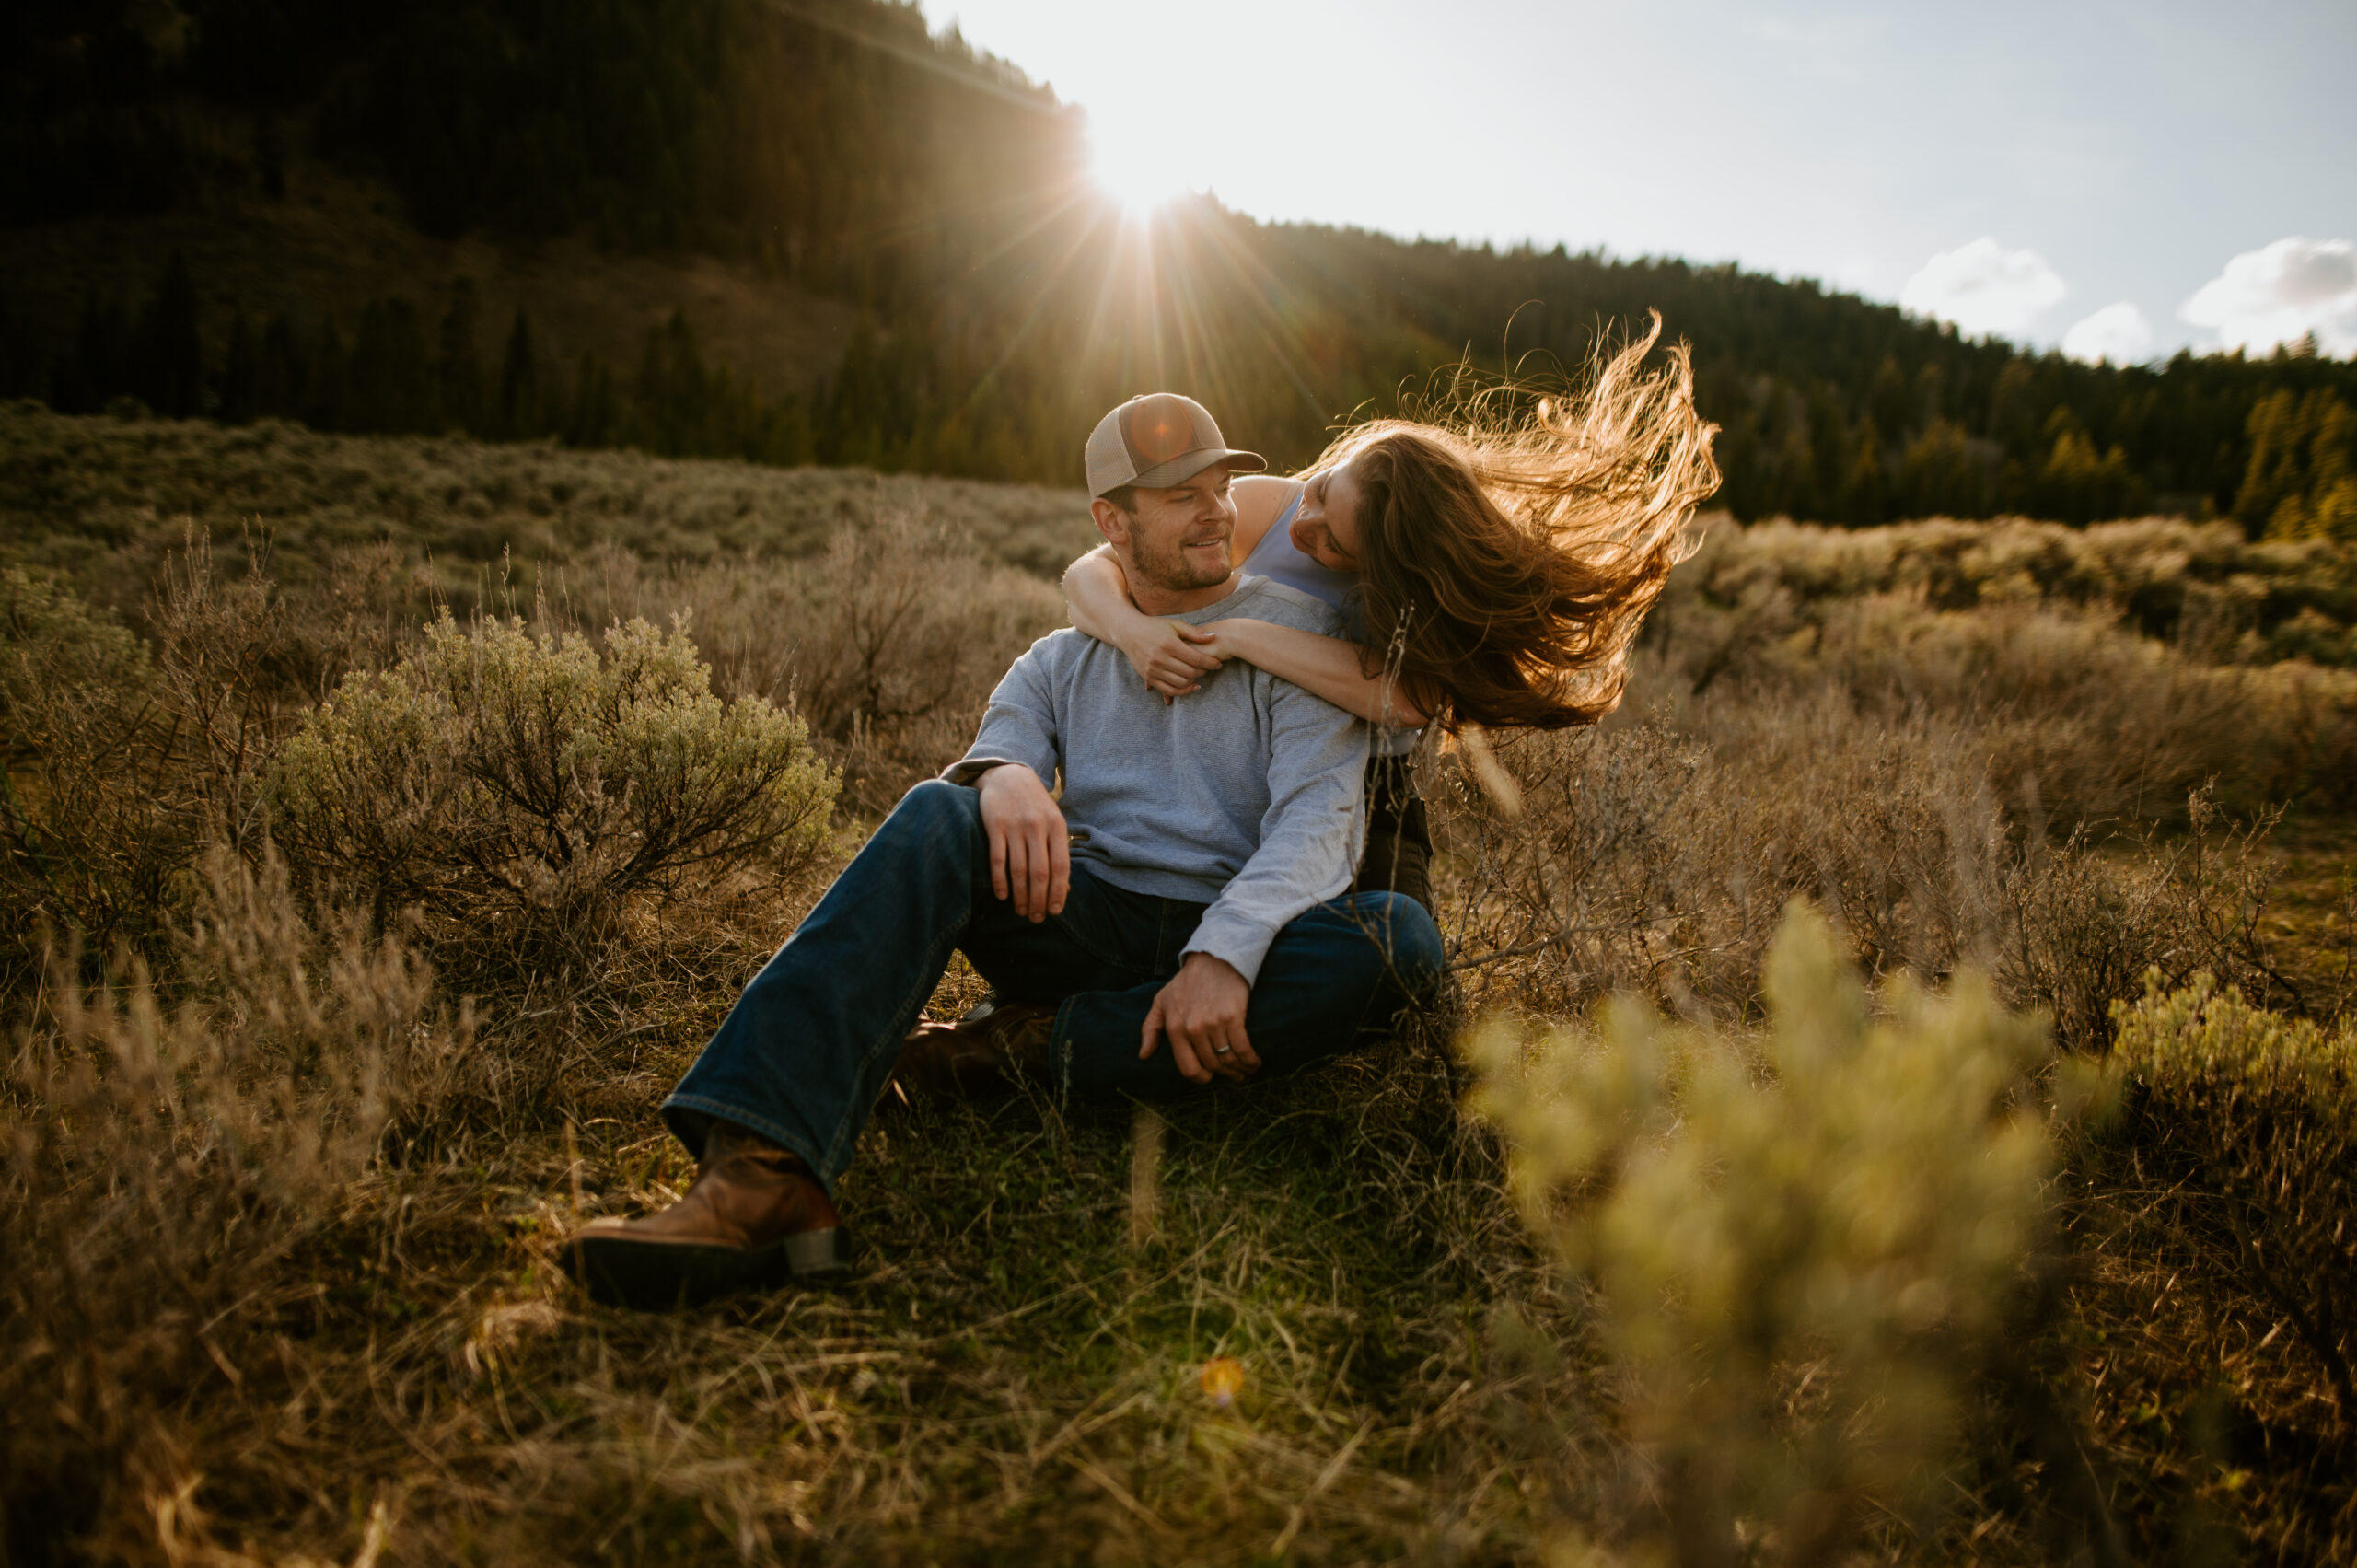 image shows a couple sitting in grass. The man sits on the ground looking off in the distance while the woman behind him flips her hair for a beautiful picture